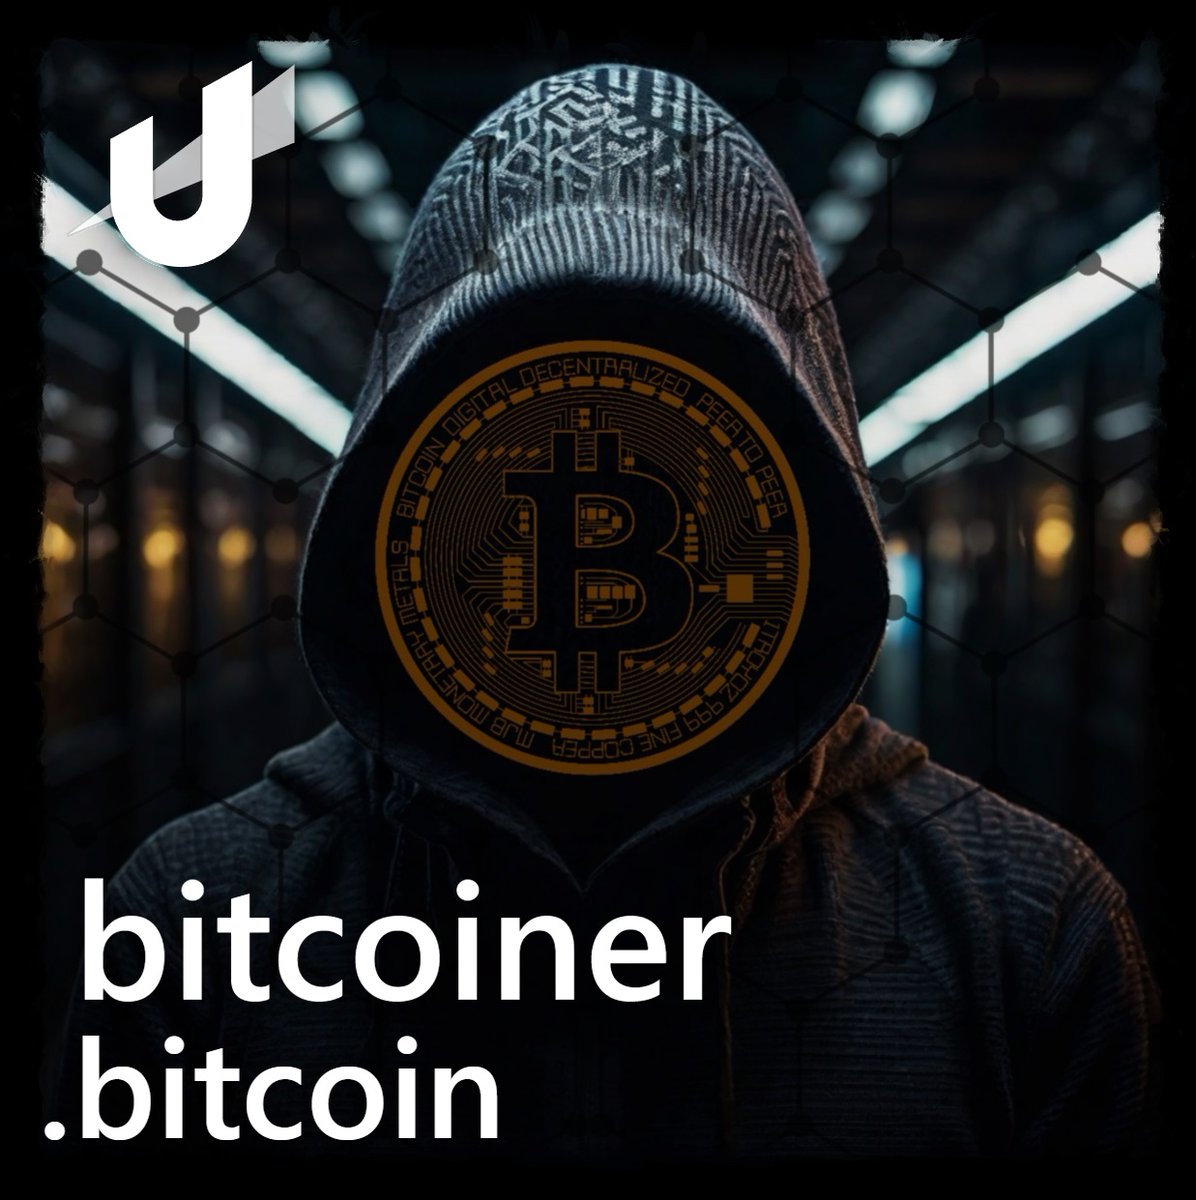 🌐 Claim your identity in the Web3 era with bitcoiner.bitcoin! 🌐

🔑 In a world where scarcity reigns, remember: only one can truly be the Bitcoiner.bitcoin  #Bitcoin 

Don't miss your chance to own this iconic web3 domain! 🔥

#unstoppabledomains #UD #UDFam #web3community #Web3…